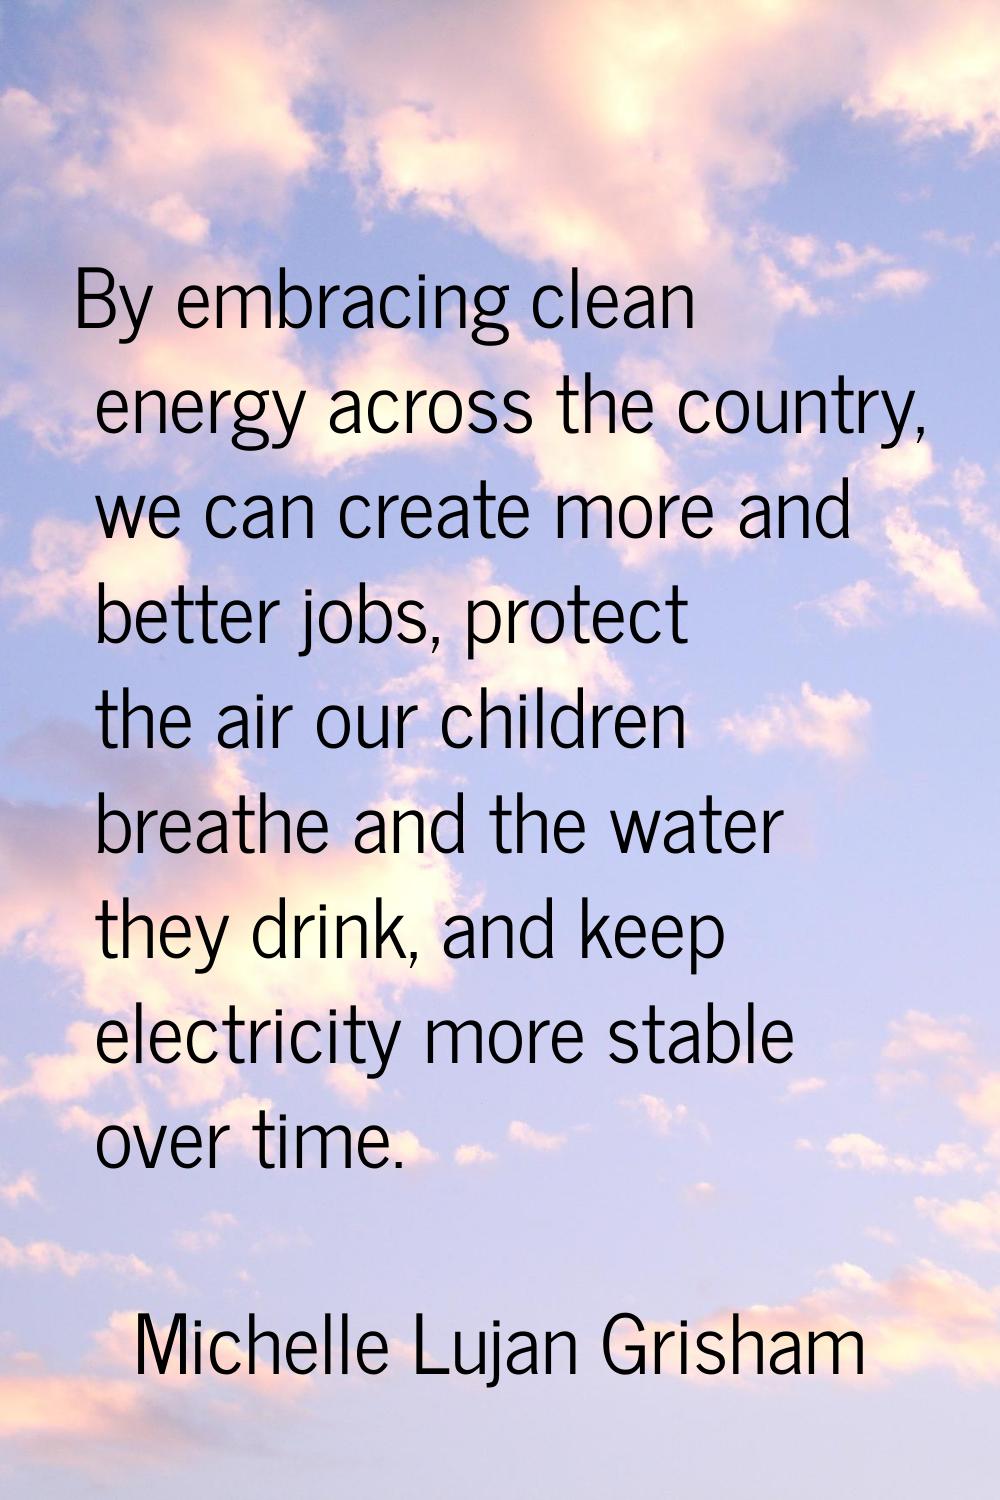 By embracing clean energy across the country, we can create more and better jobs, protect the air o